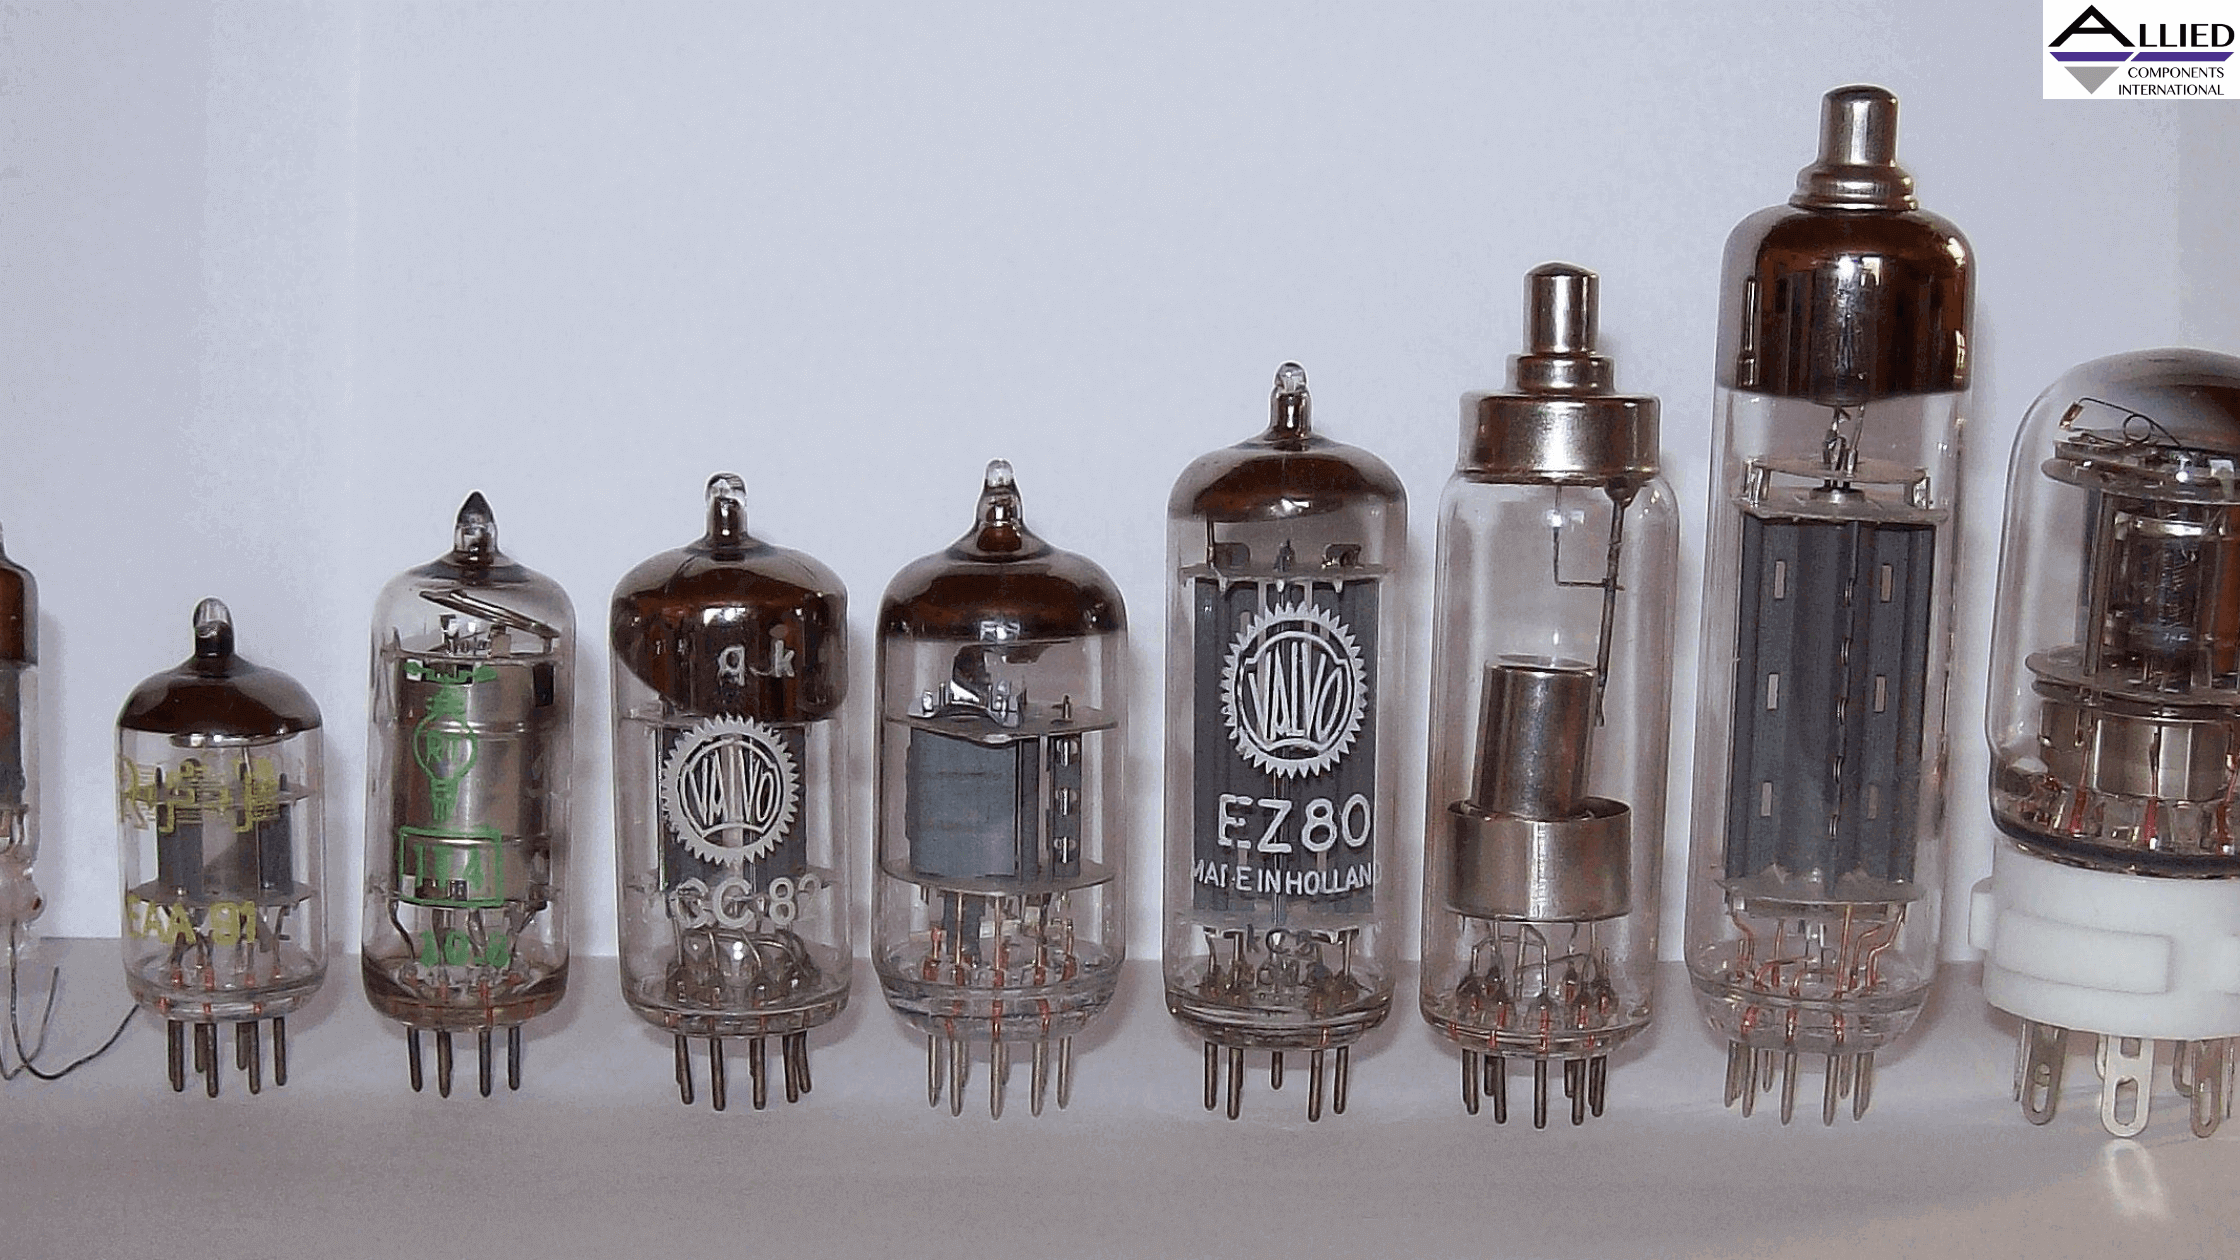 Exploring Vacuum Tubes History to Understand Circuit Evolution